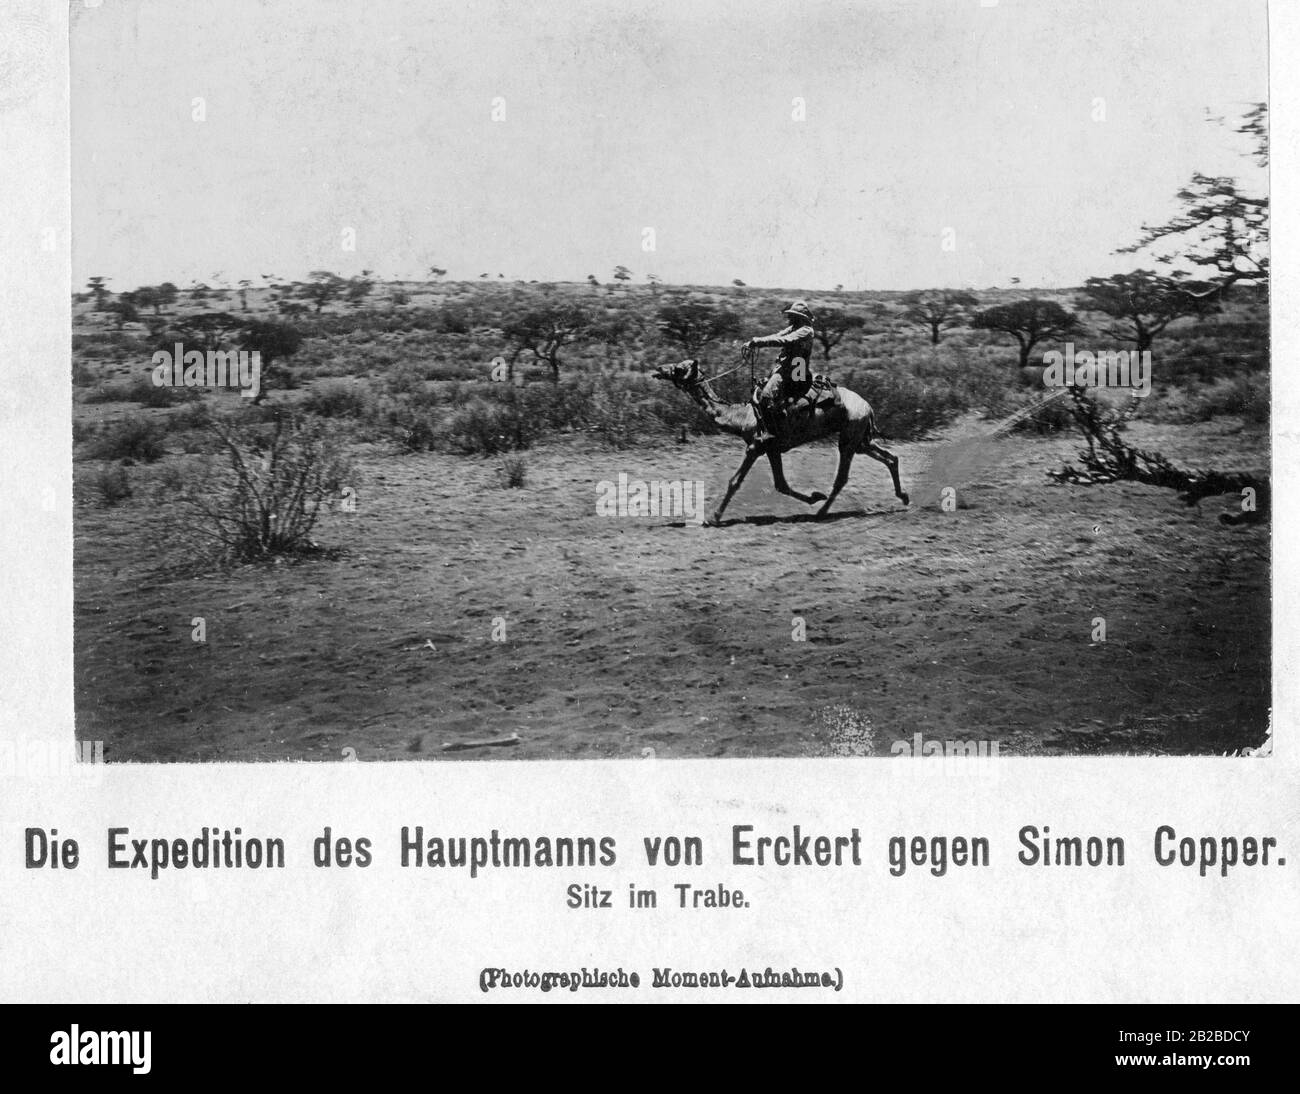 In German South West Africa the local population revolted against German supremacy between 1904 and 1908, first under the leadership of Hendrik Witbooi and from 1905 under Simon Copper. Captain Friedrich von Erckert conducted a campaign against them. The picture shows a German soldier riding a camel. Stock Photo